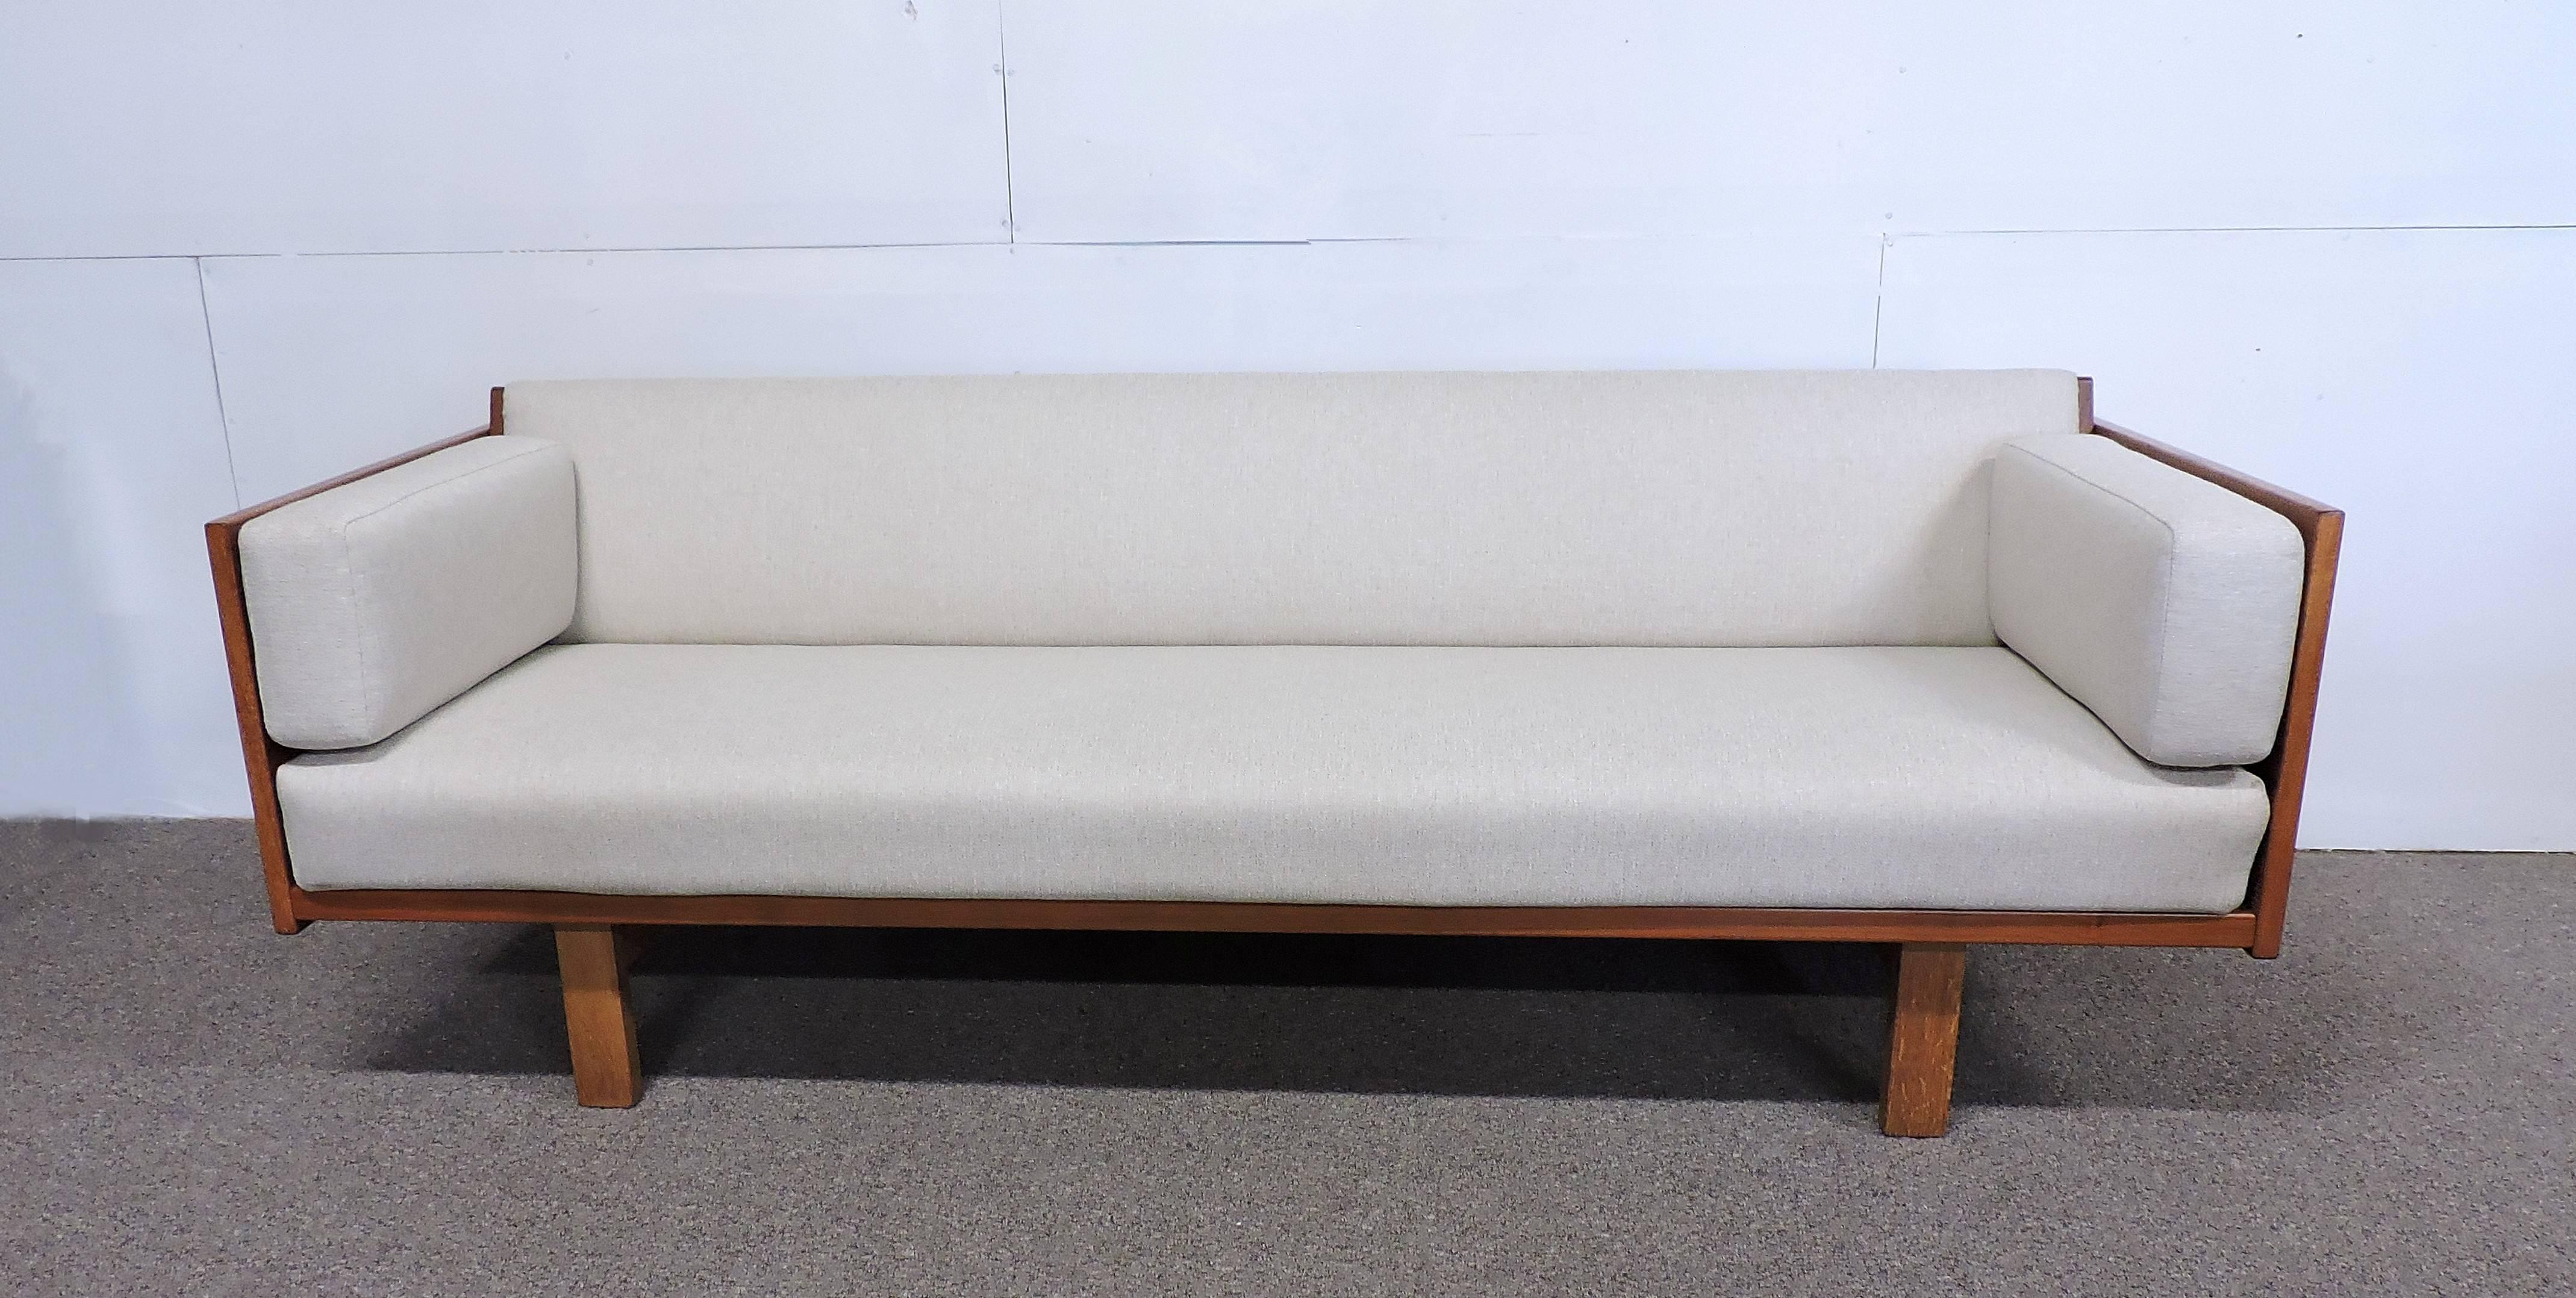 Beautiful sofa or daybed designed in 1954 by Hans Wegner and manufactured in Denmark by GETAMA. This sofa has teak sides and an angled back that lifts up to make a roomy sleep area. Newly upholstered in a light beige fabric. Retains the original